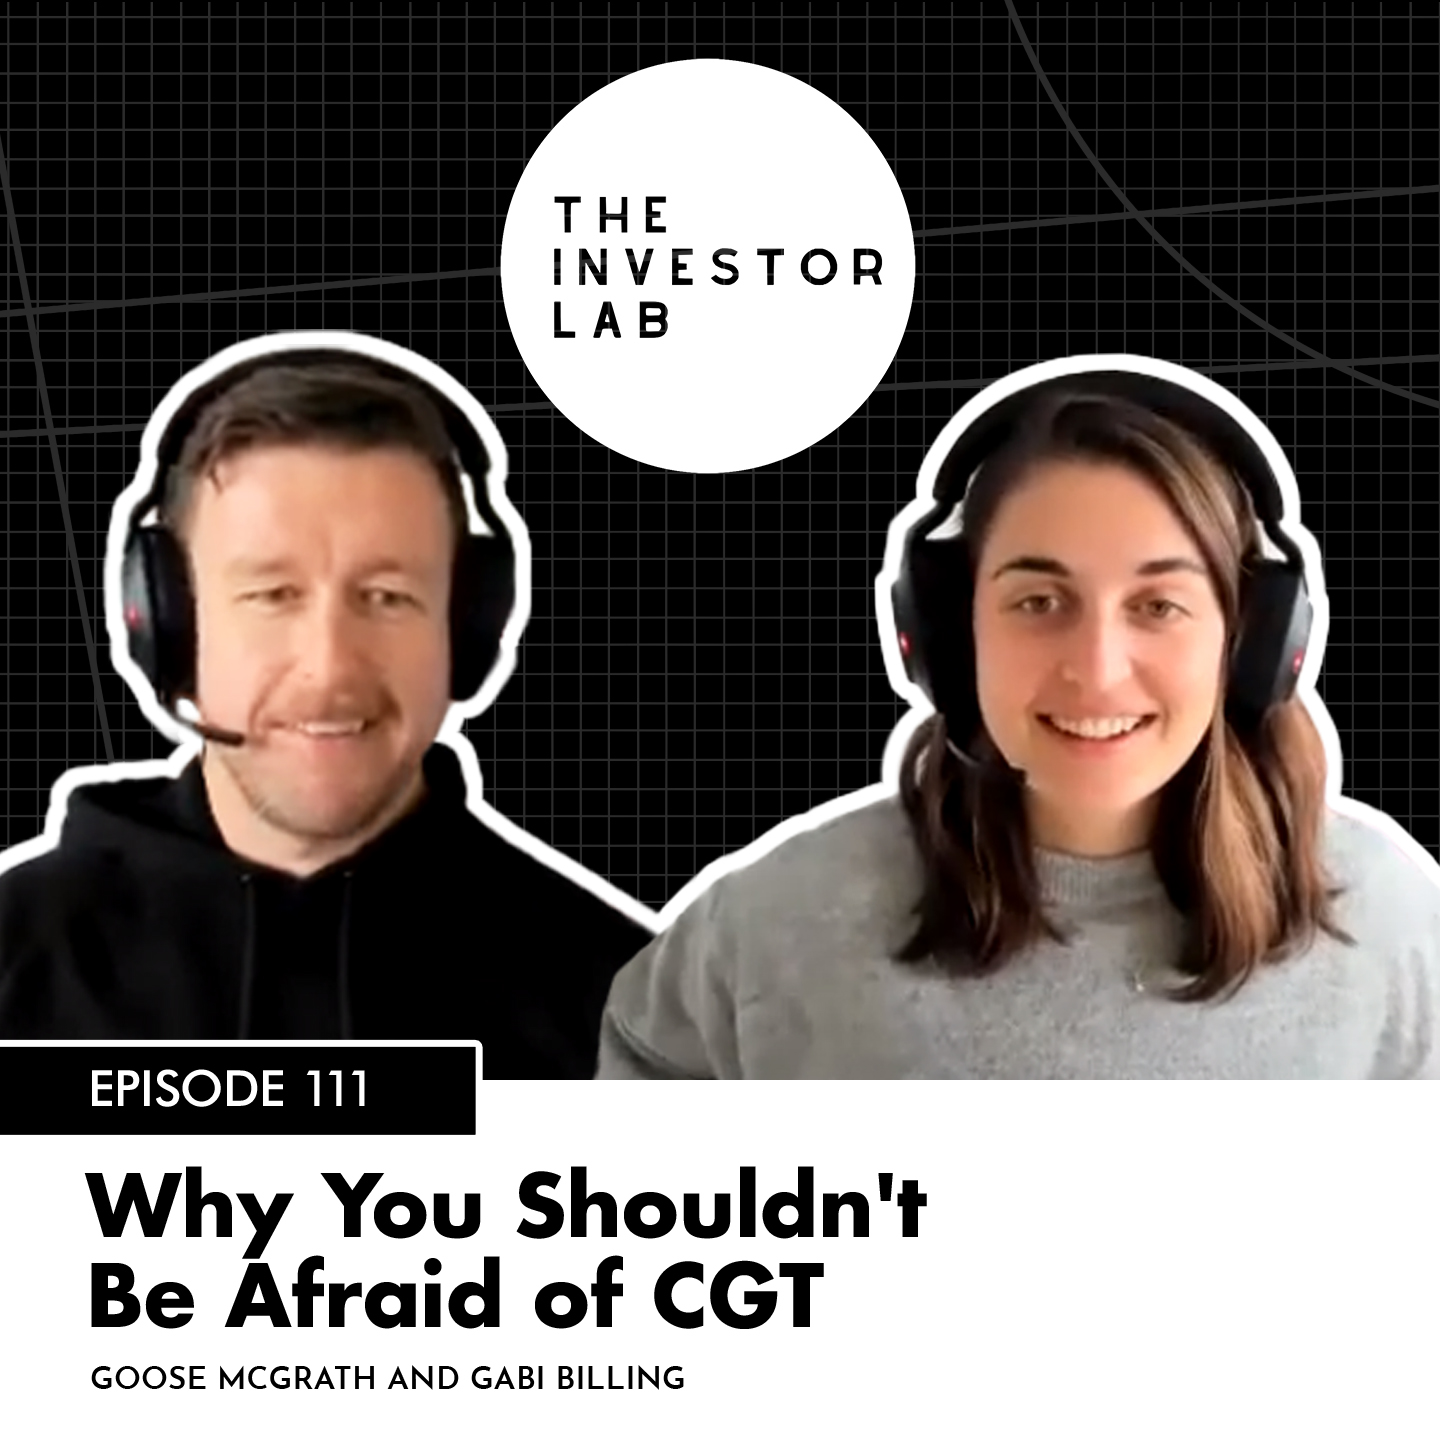 Why You Shouldn't Be Afraid of CGT